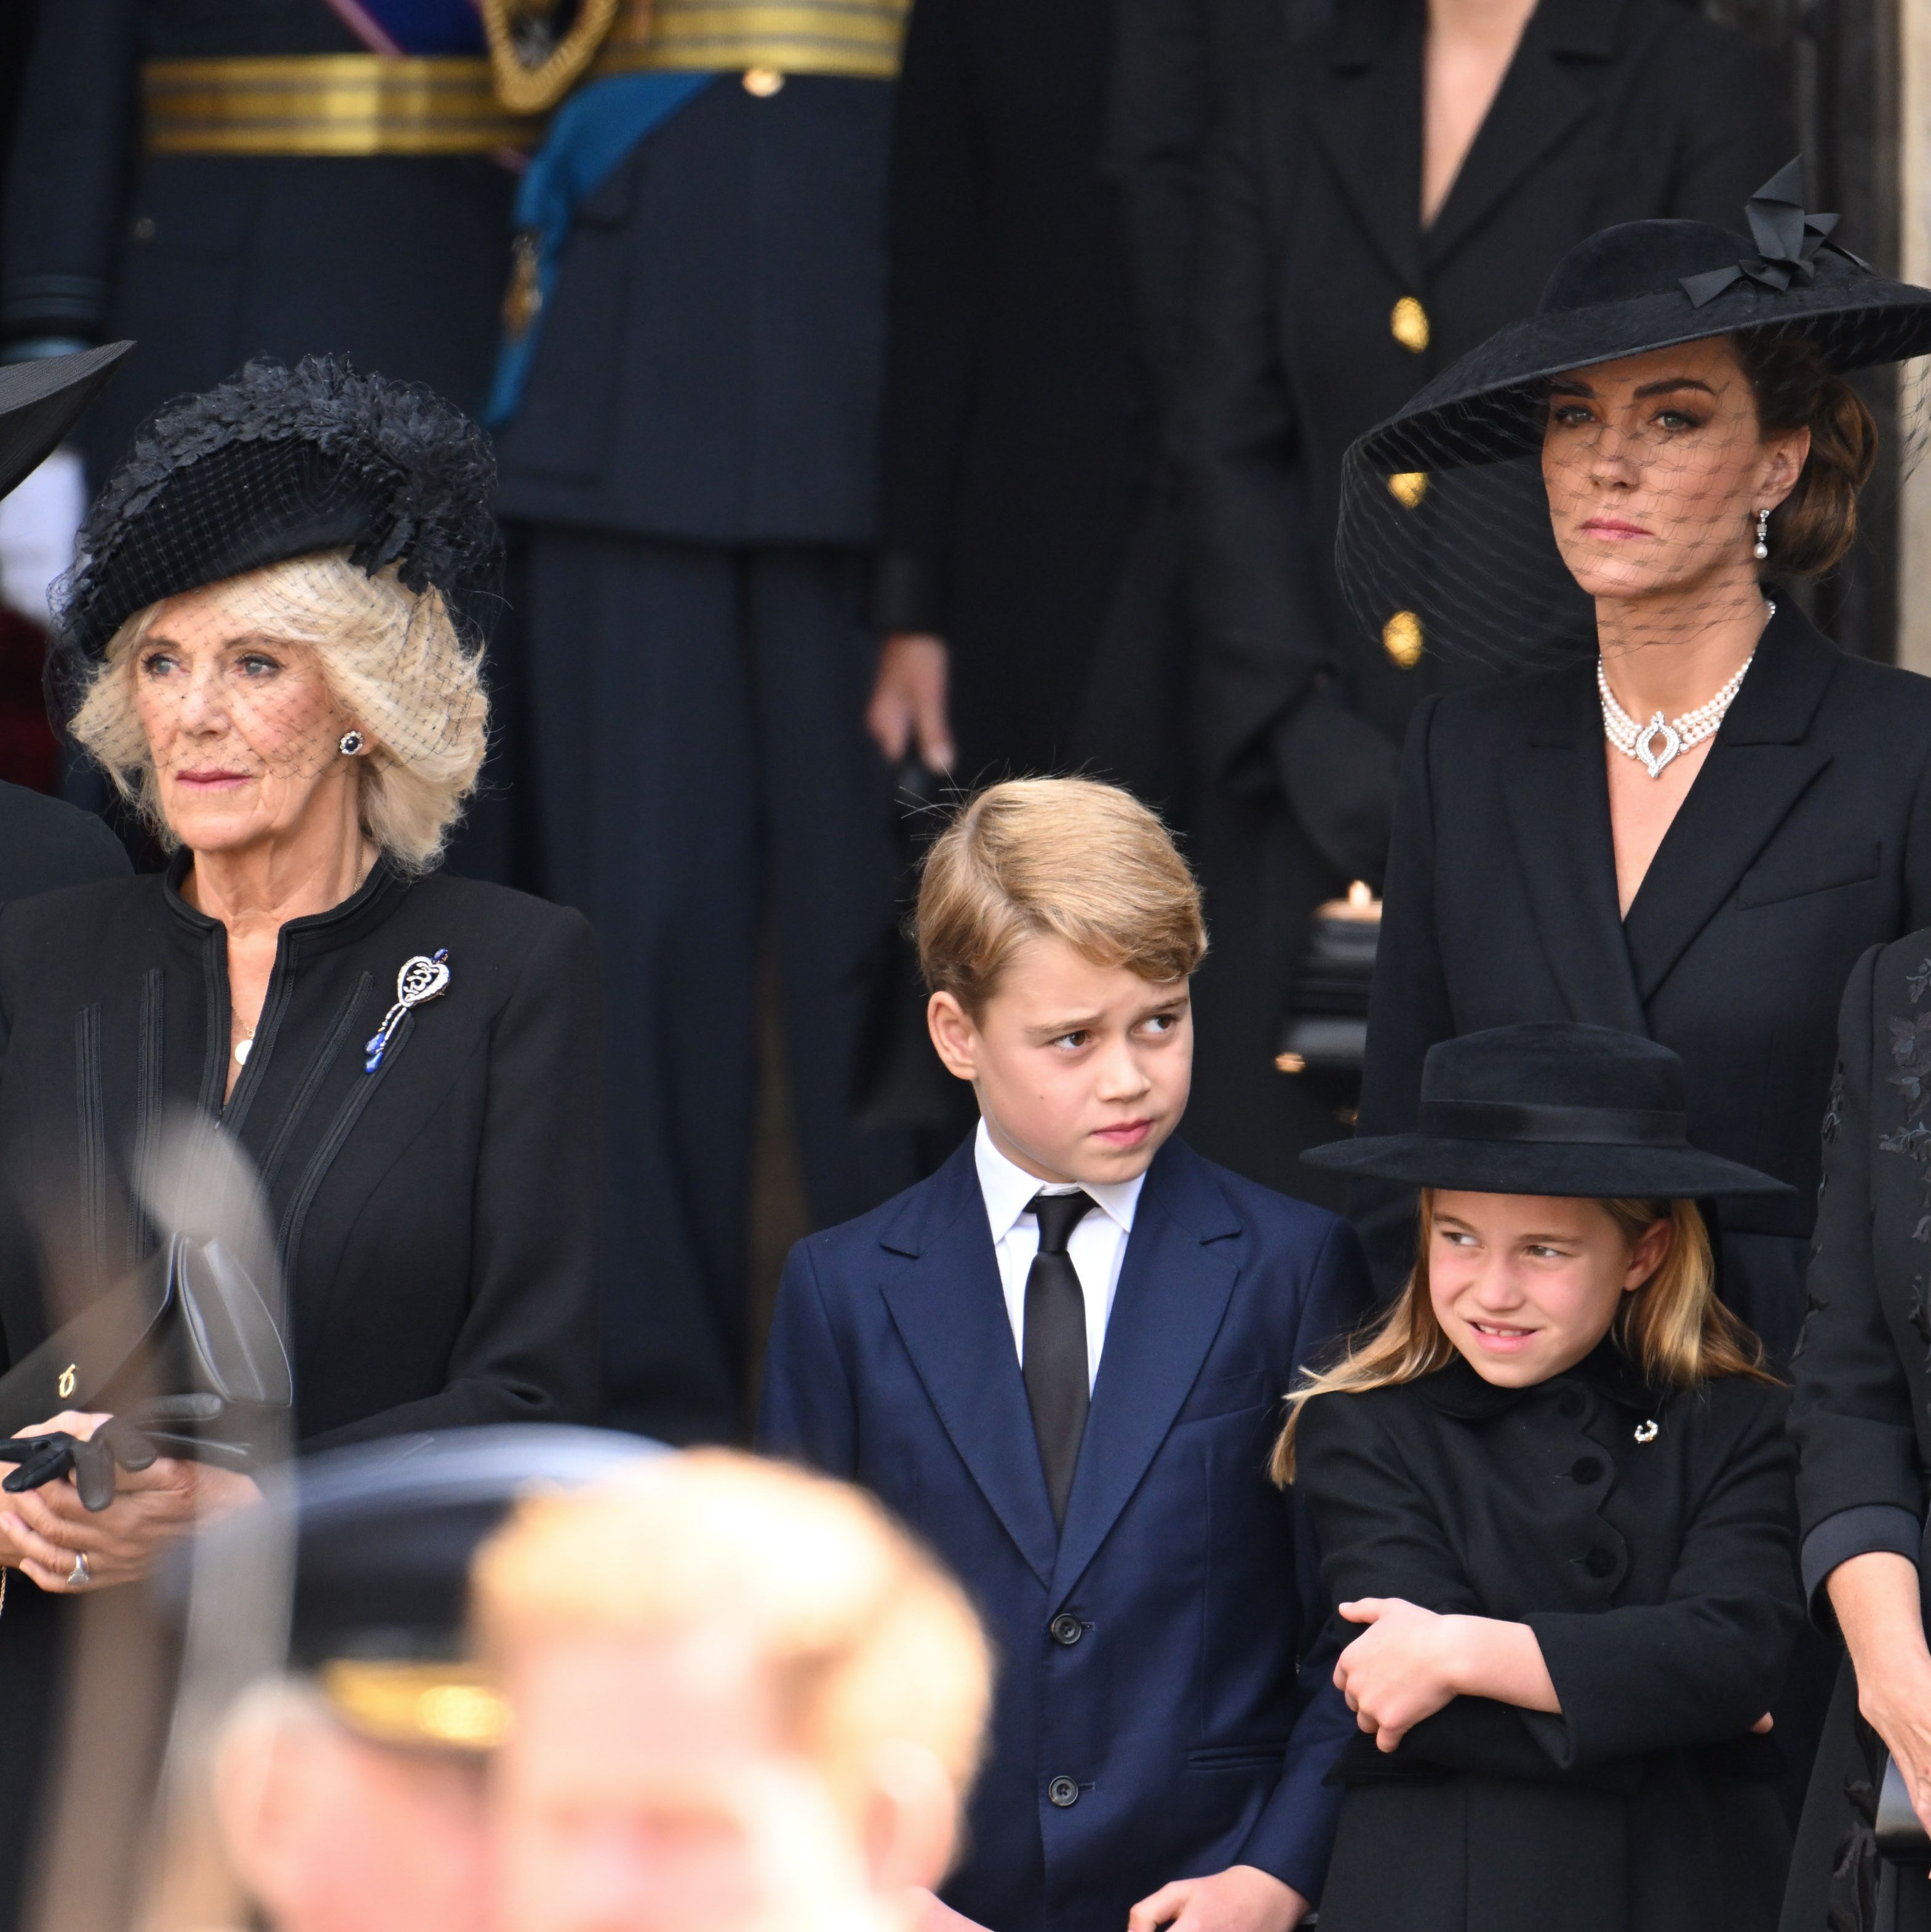 The Prince and Princess of Wales' oldest child didn't quite dress in black like everyone else. 